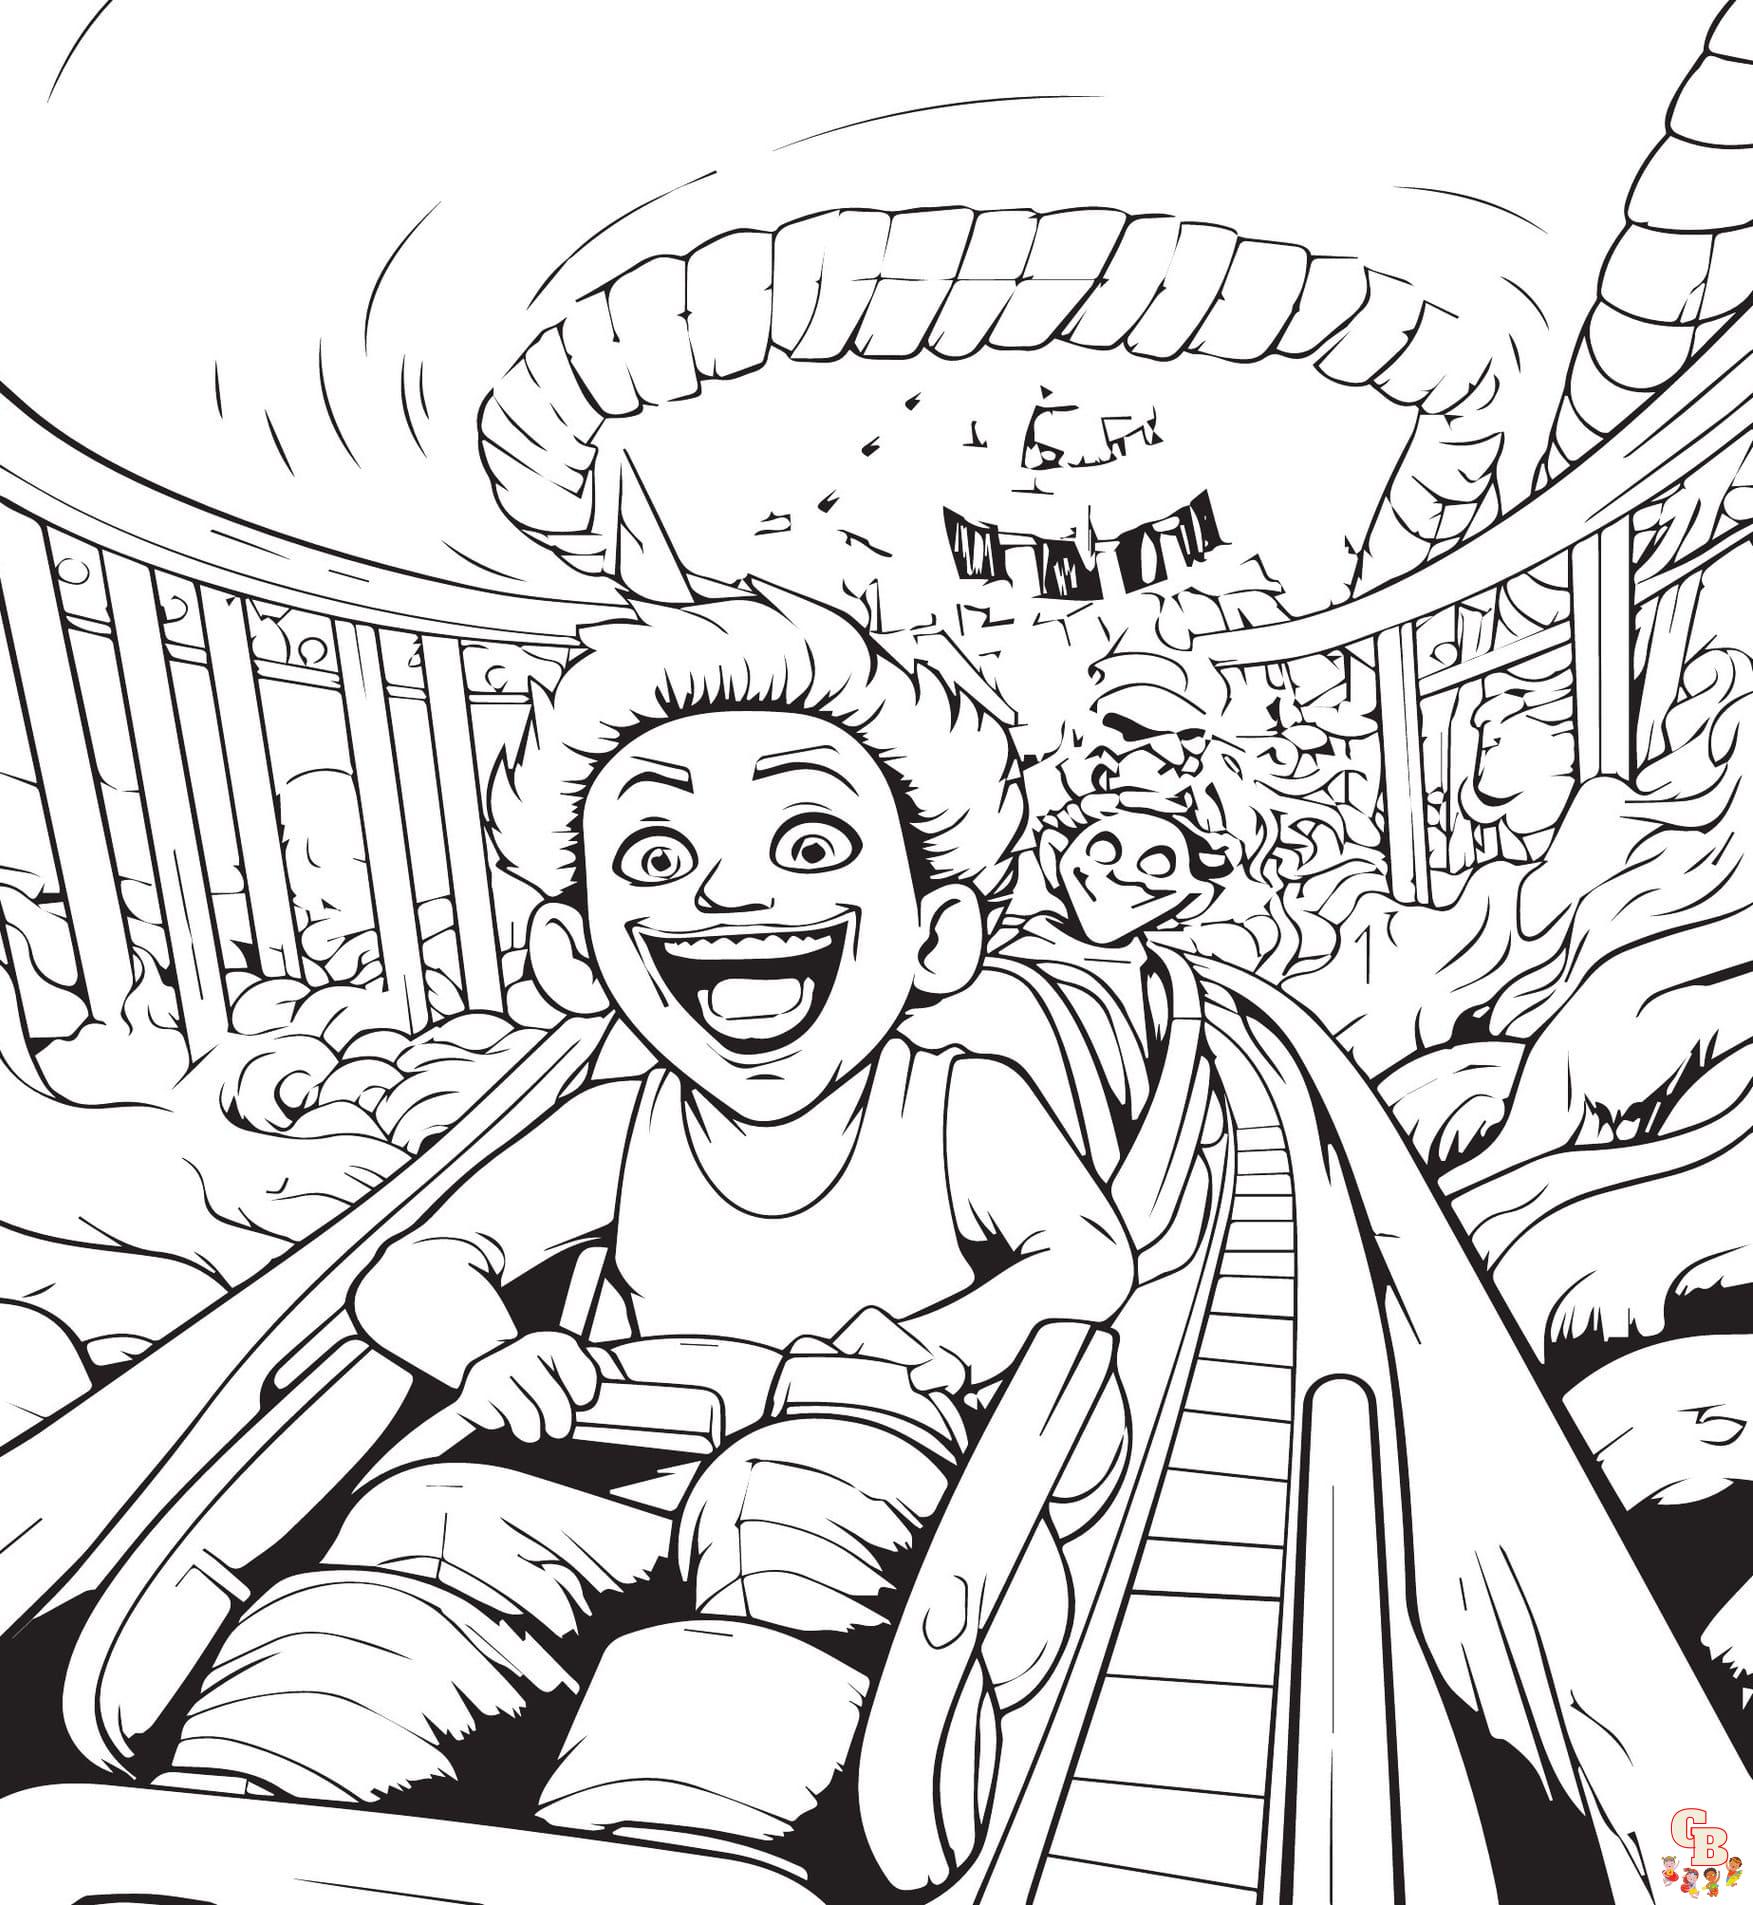 Roller Coaster Coloring Pages